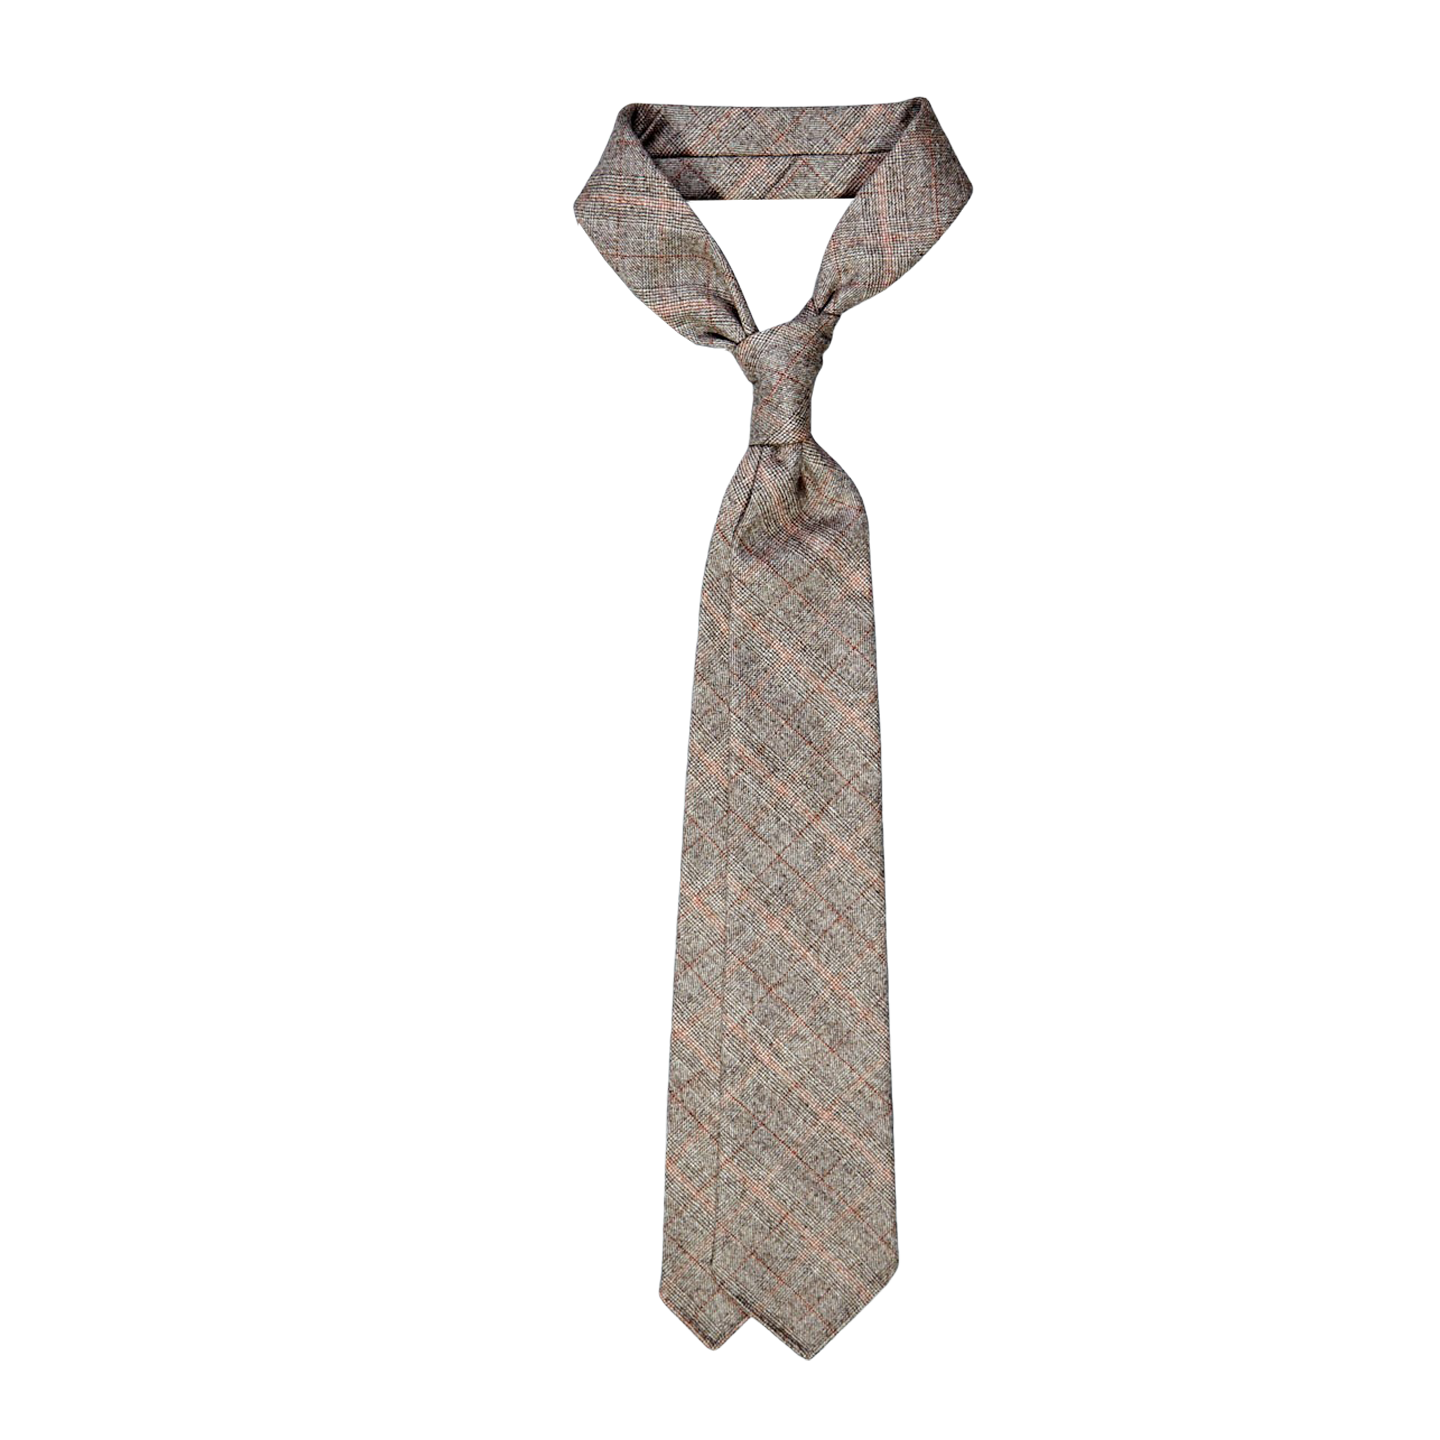 A Dreaming Of Monday Brown Checked 7-Fold Vintage Wool Tie in a brown and beige plaid pattern on a white background.